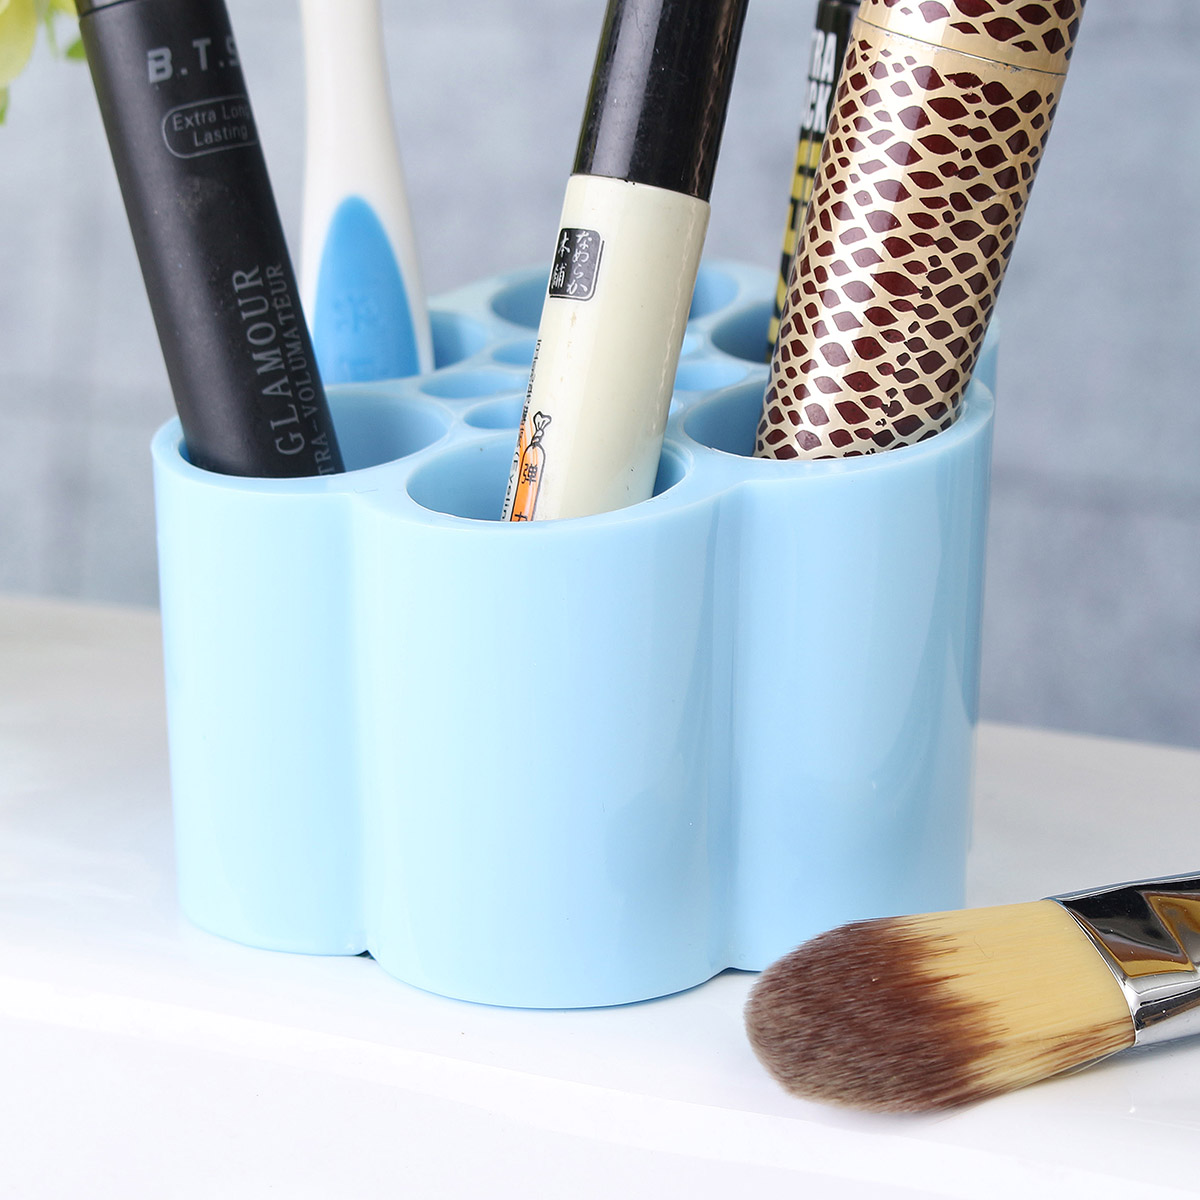 4-Colors-Brushes-Organizer-Makeup-Cosmetic-Case-Holder-Display-Stand-Storage-Box-1114728-2